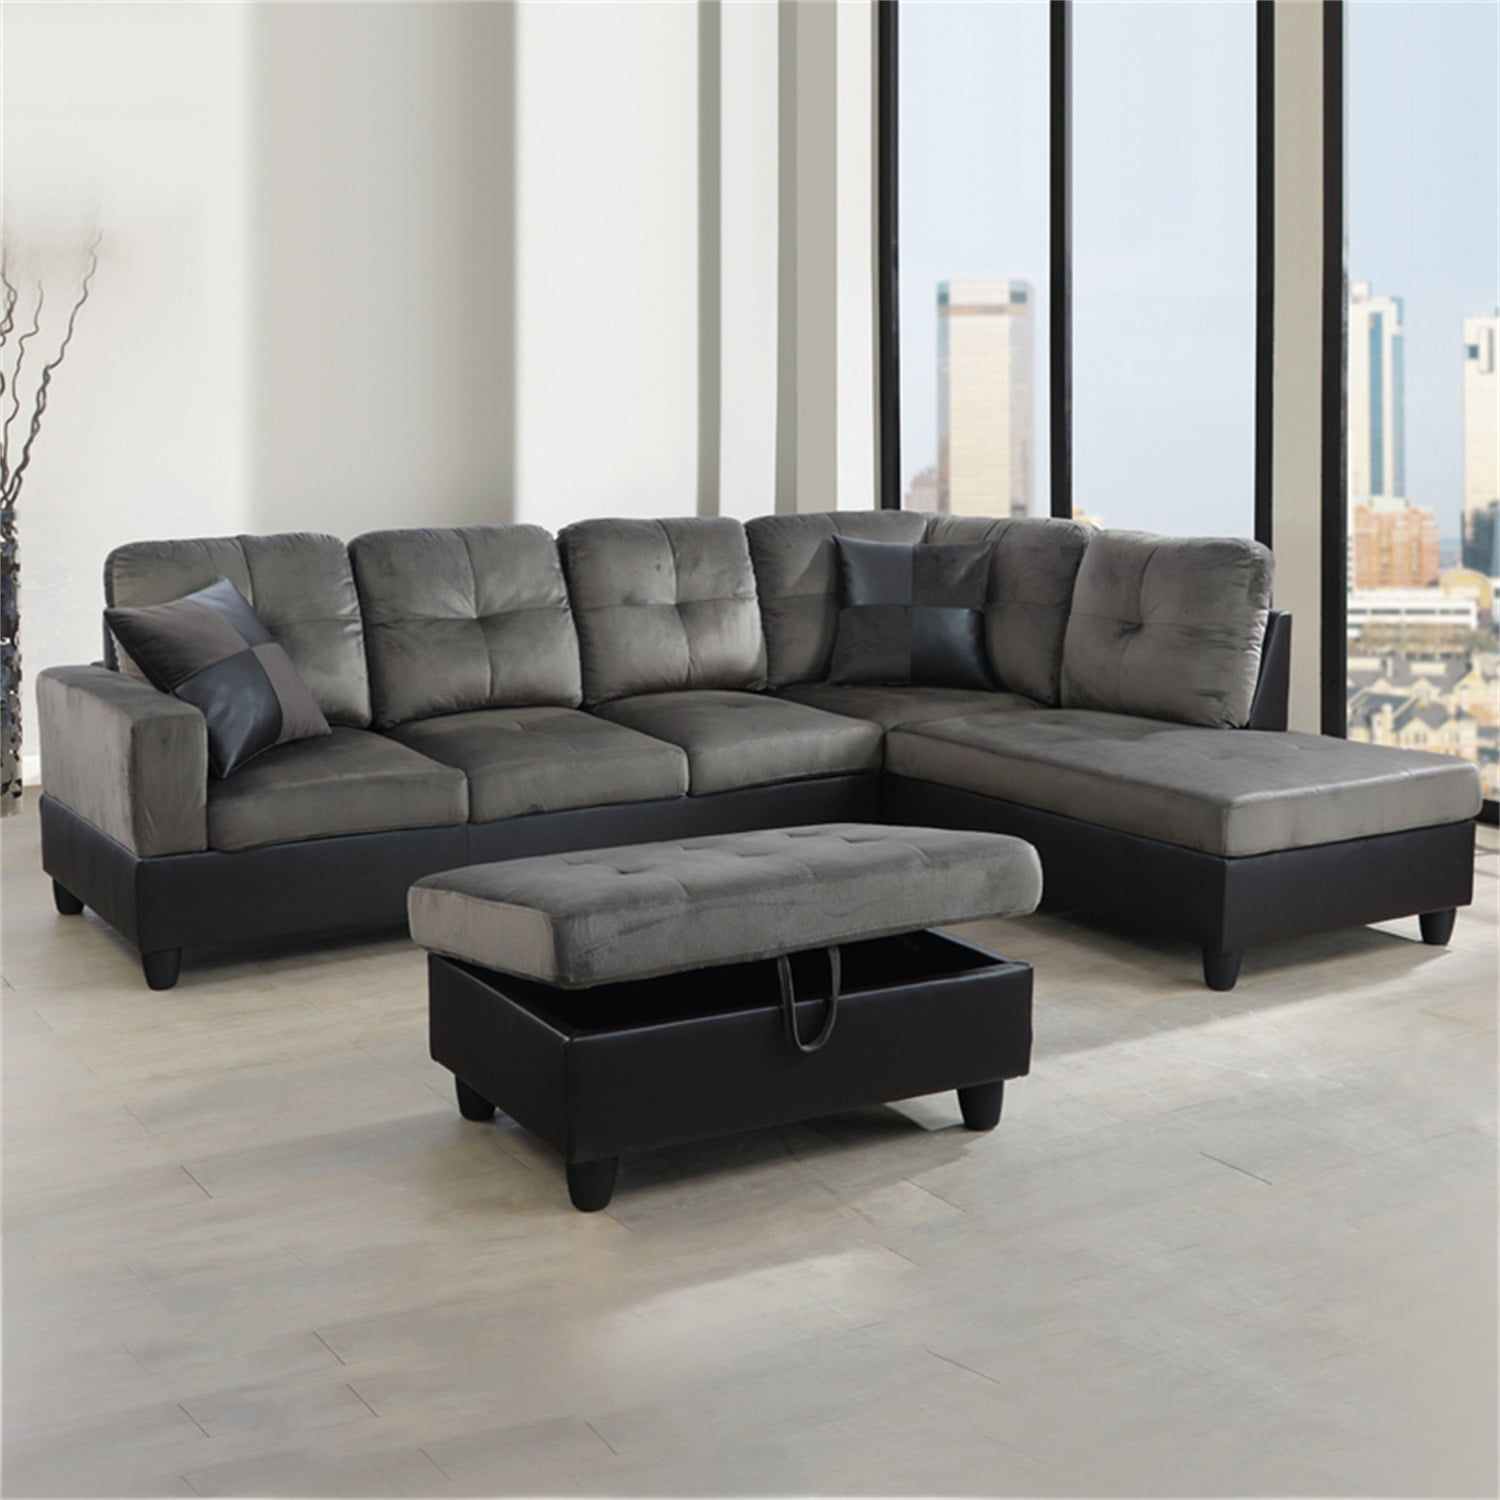 Hommoo Sectional Sofa, Free Combination Sectional Couch, Small L Shaped Sectional  Sofa, Modern Sofa Set For Living Room, Taupe(Without Ottoman) – Walmart With Regard To Free Combination Sectional Couches (Photo 2 of 15)